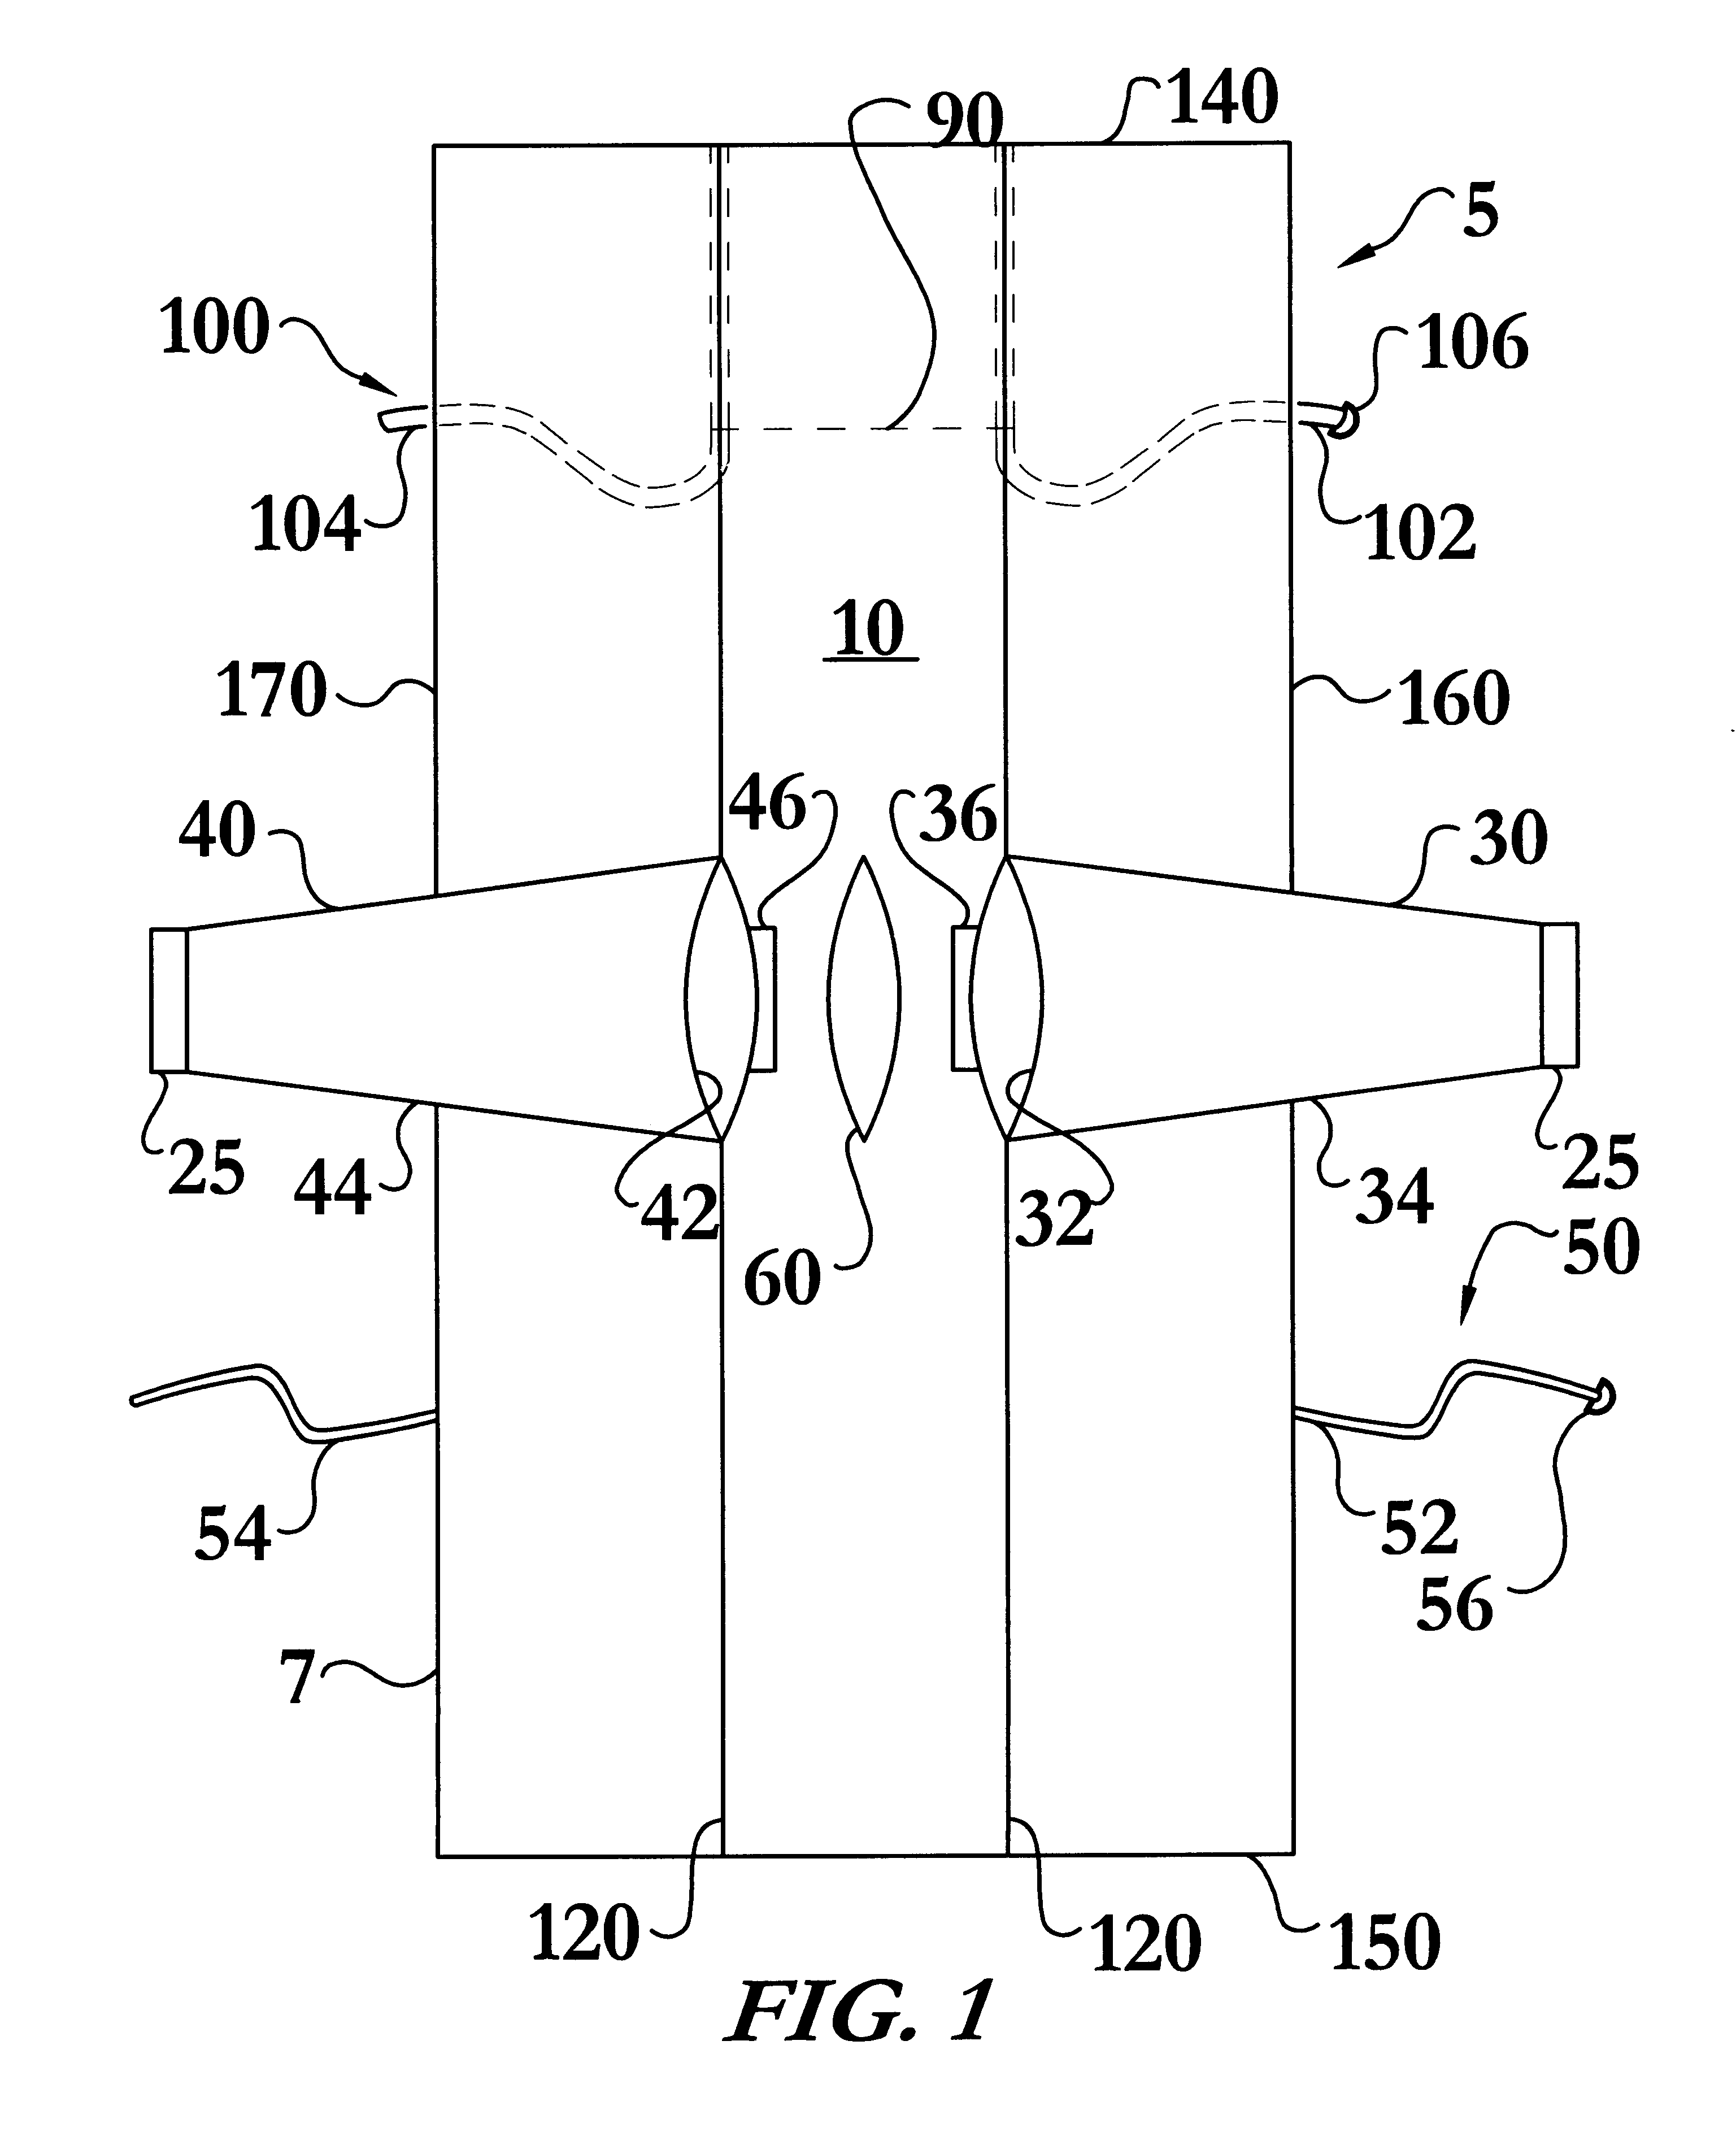 Combination cushion, carry device, and garment apparatus